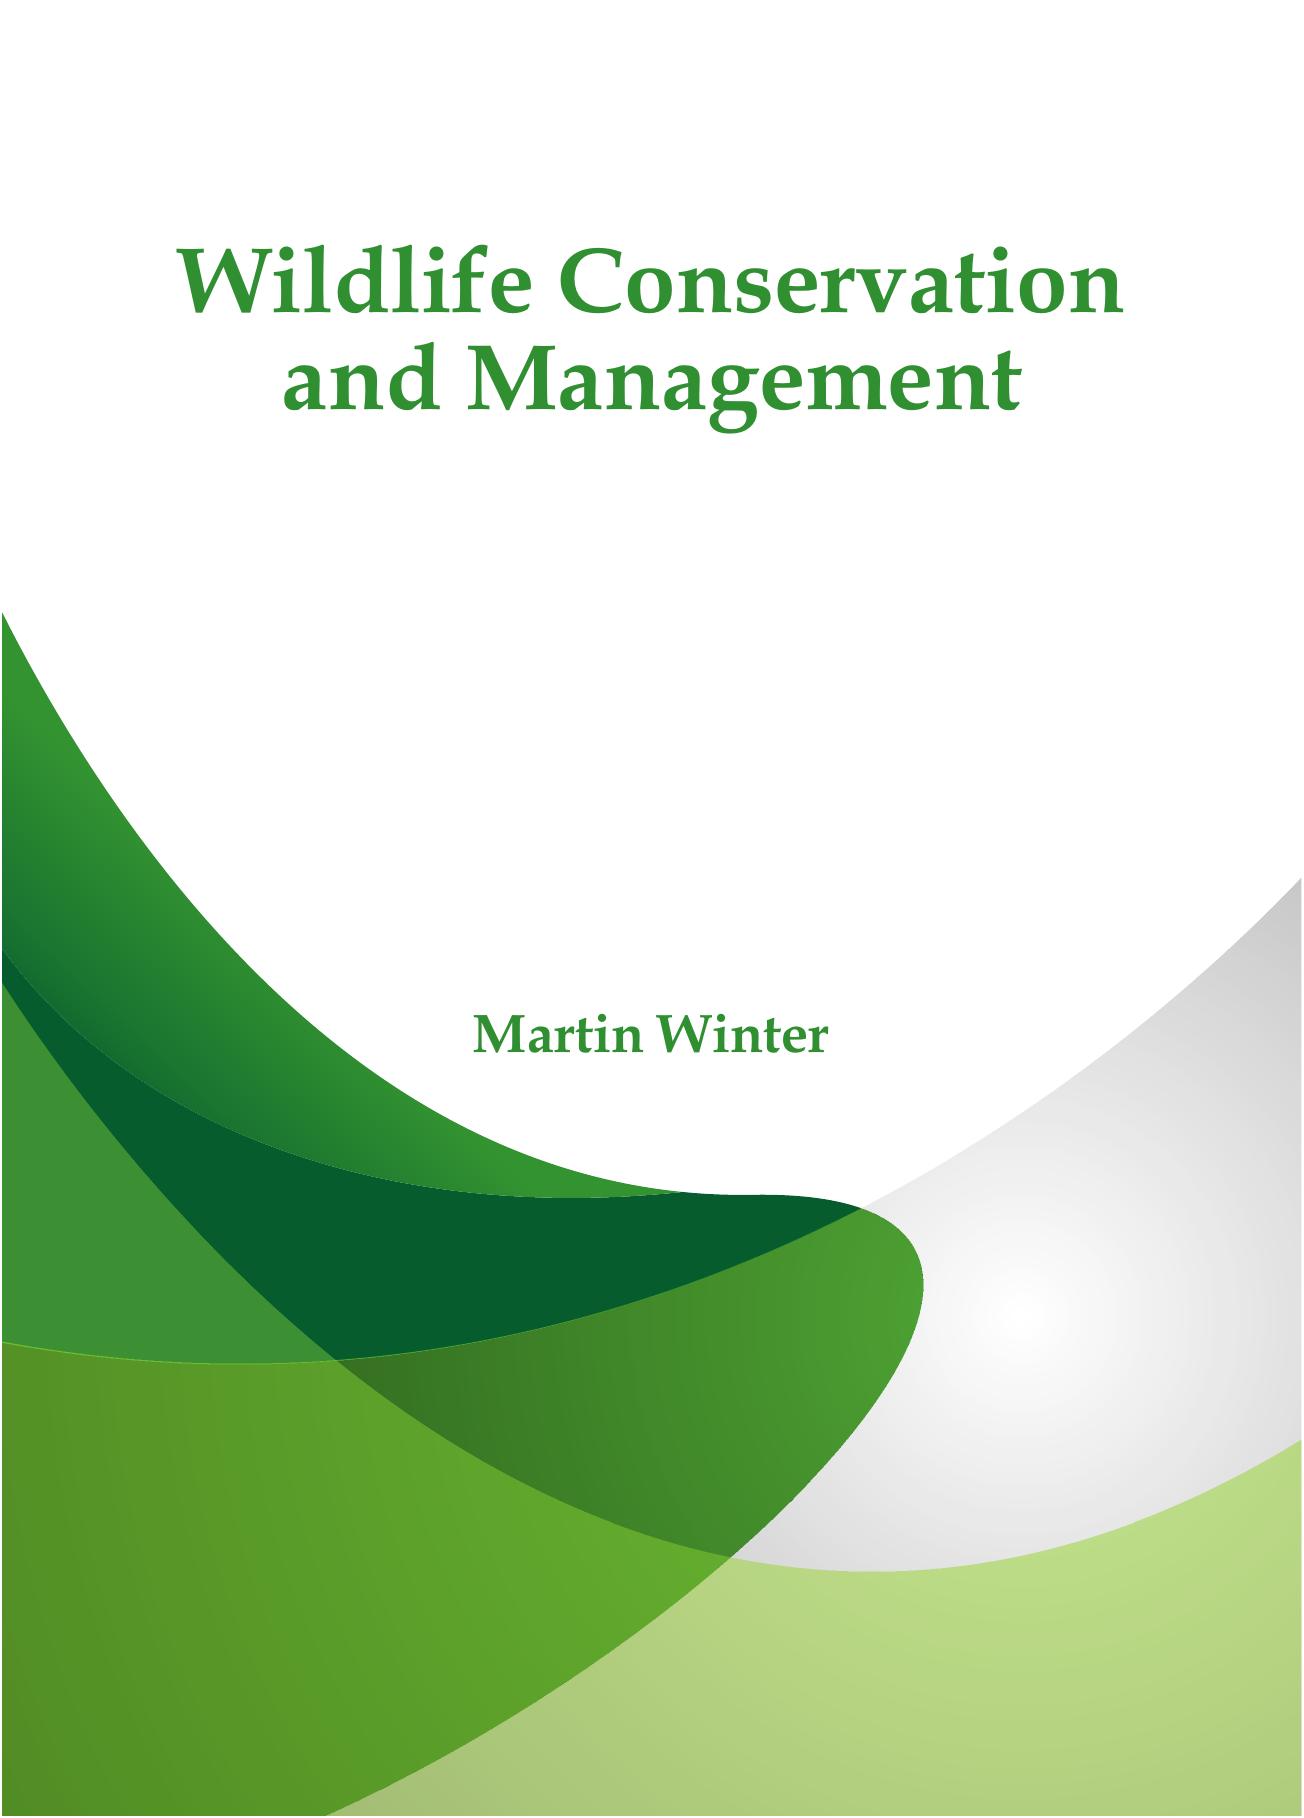 Wildlife Conservation and Management-2  2017